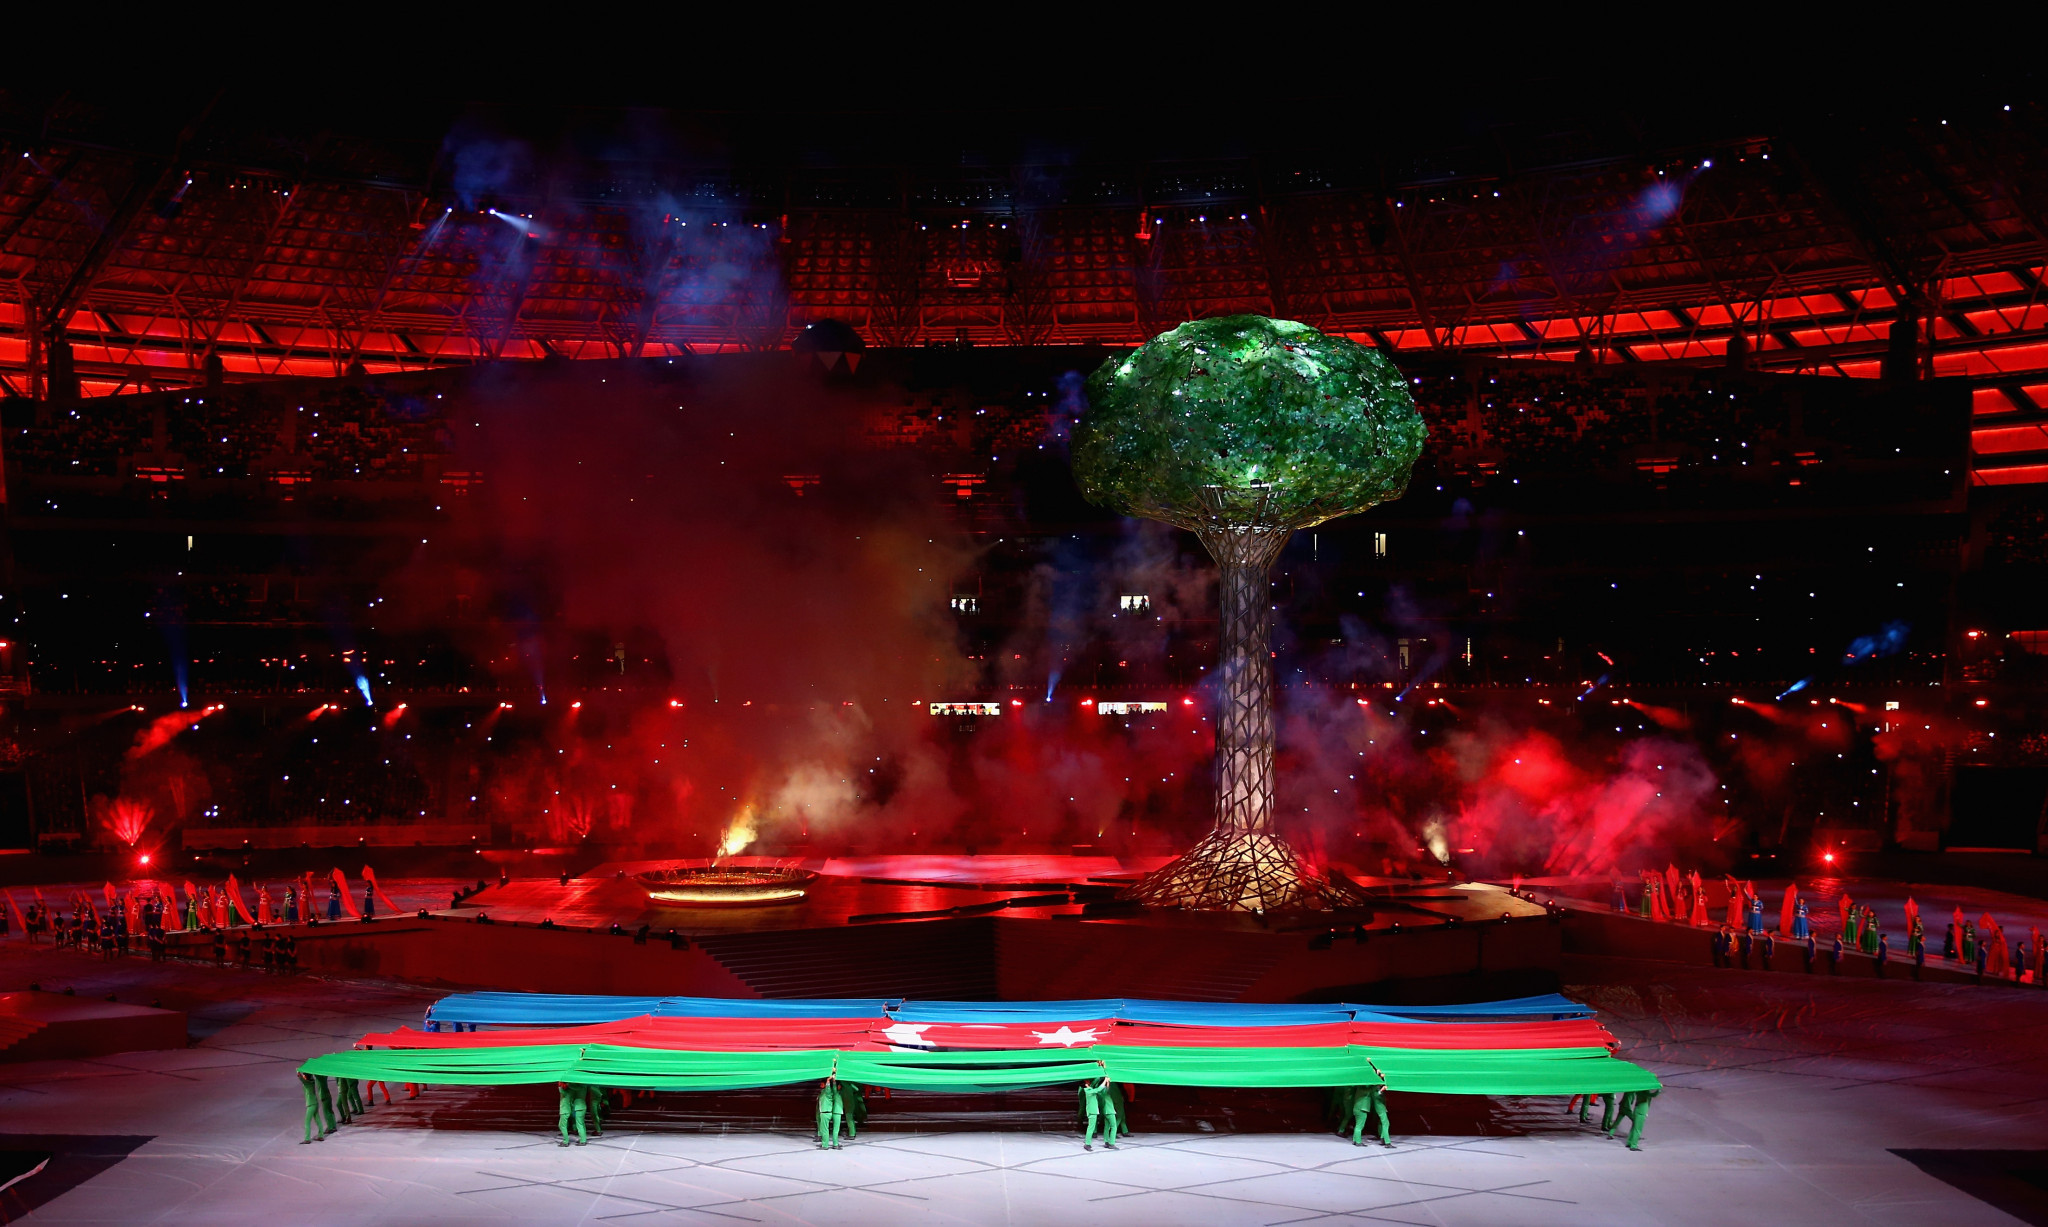 The Islamic Solidarity Games in 2017 proved Azerbaijan's capability of staging major multi-sport competitions again  ©Getty Images